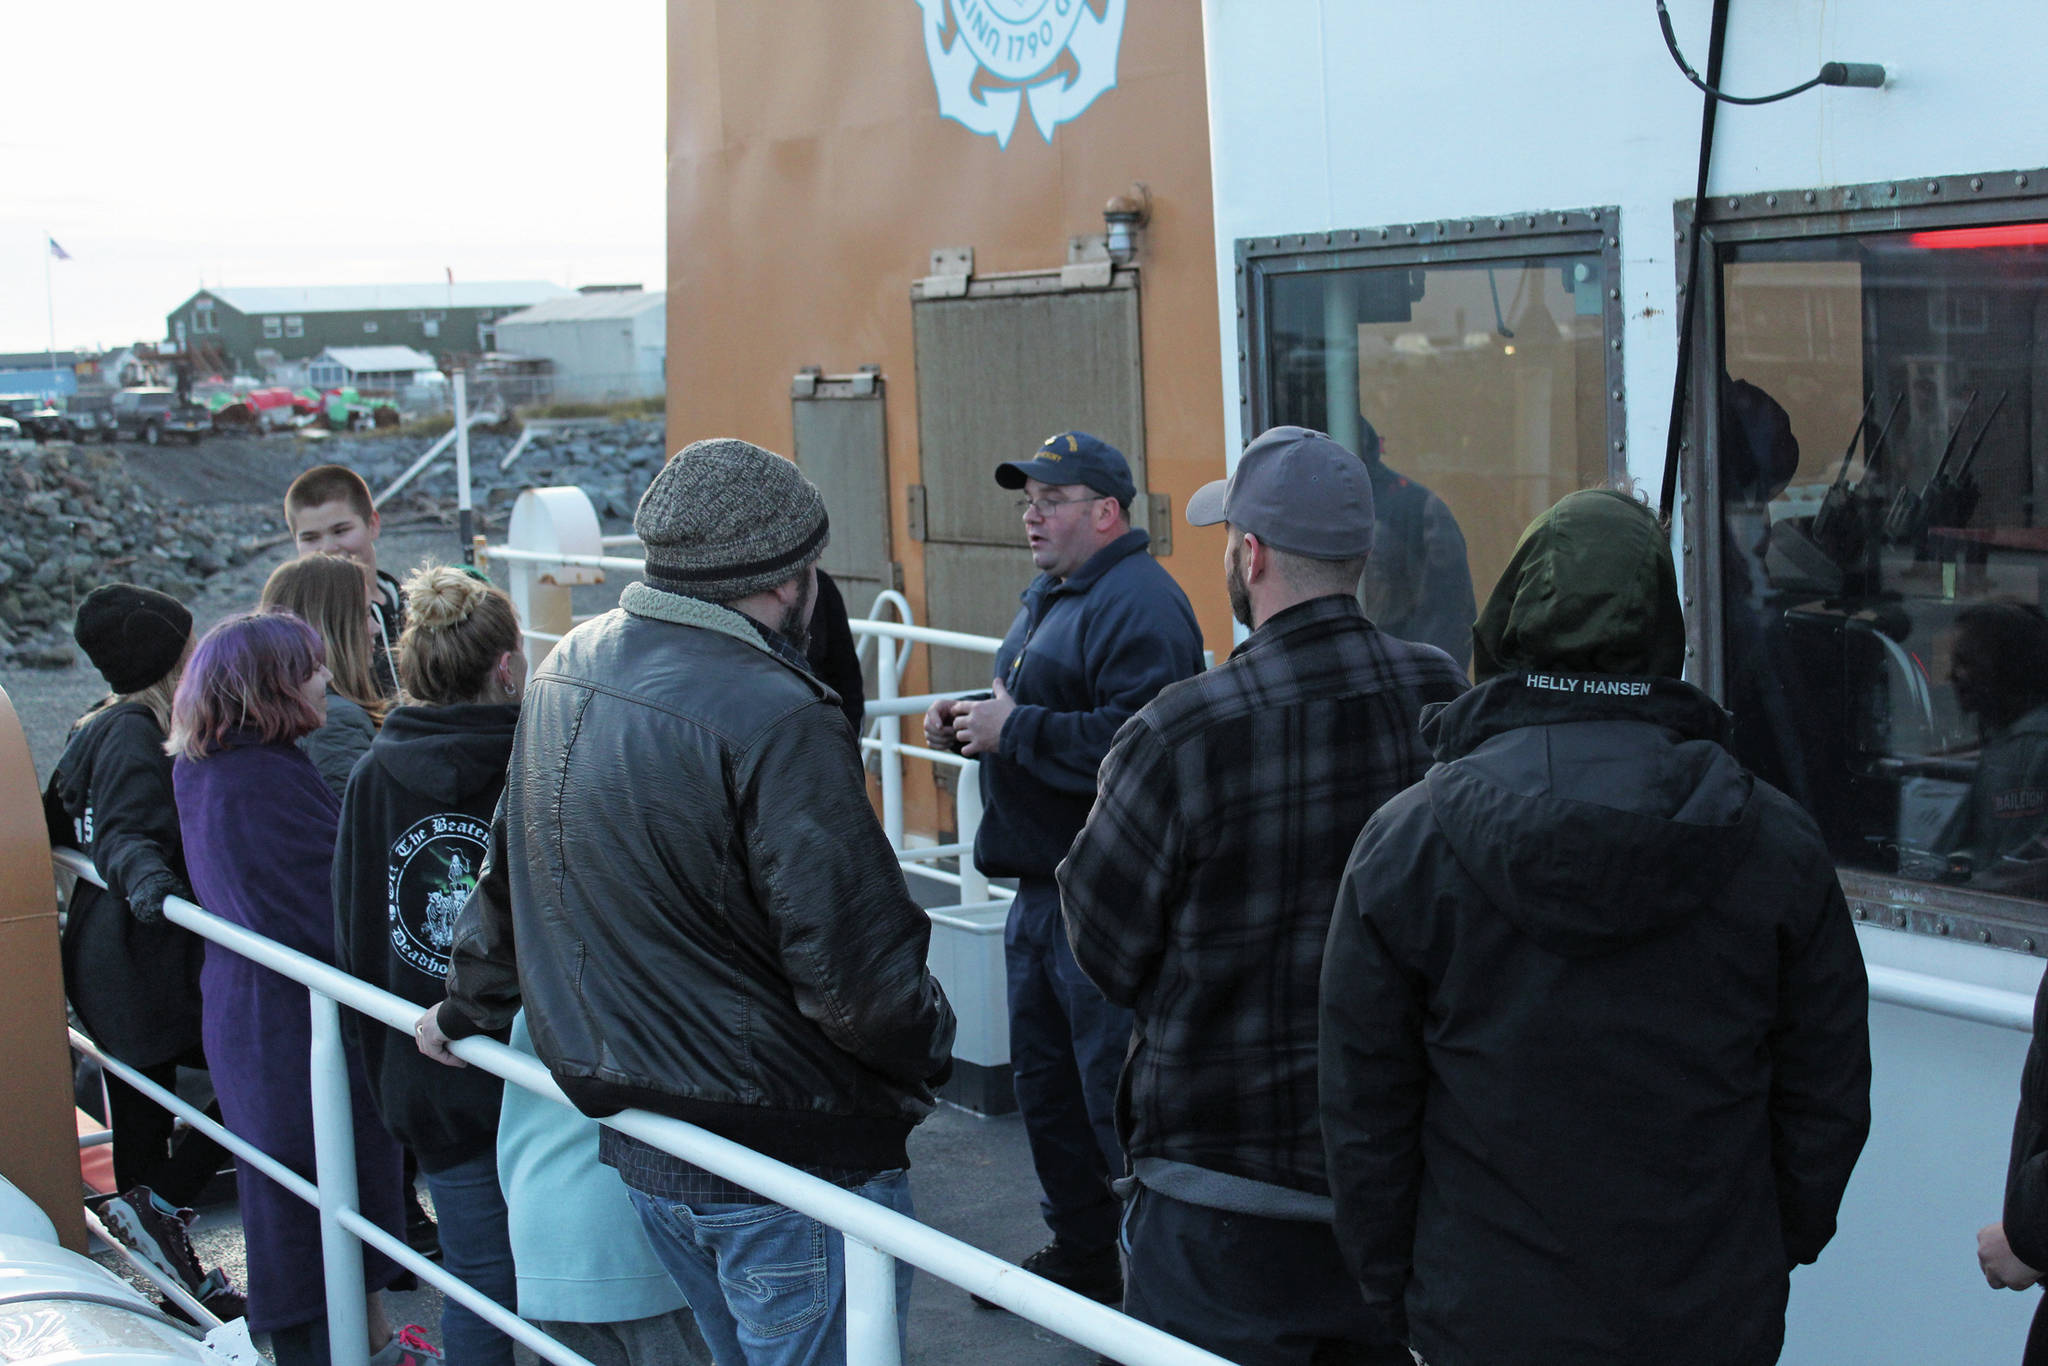 A group of community members gets briefs before they embark on a trip through the Haunted Hickory, a haunted house set up on the US Coast Guard Cutter Hickory vessel, on Friday, Oct. 25, 2019 at the harbor in Homer, Alaska. (Photo by Megan Pacer/Homer News)